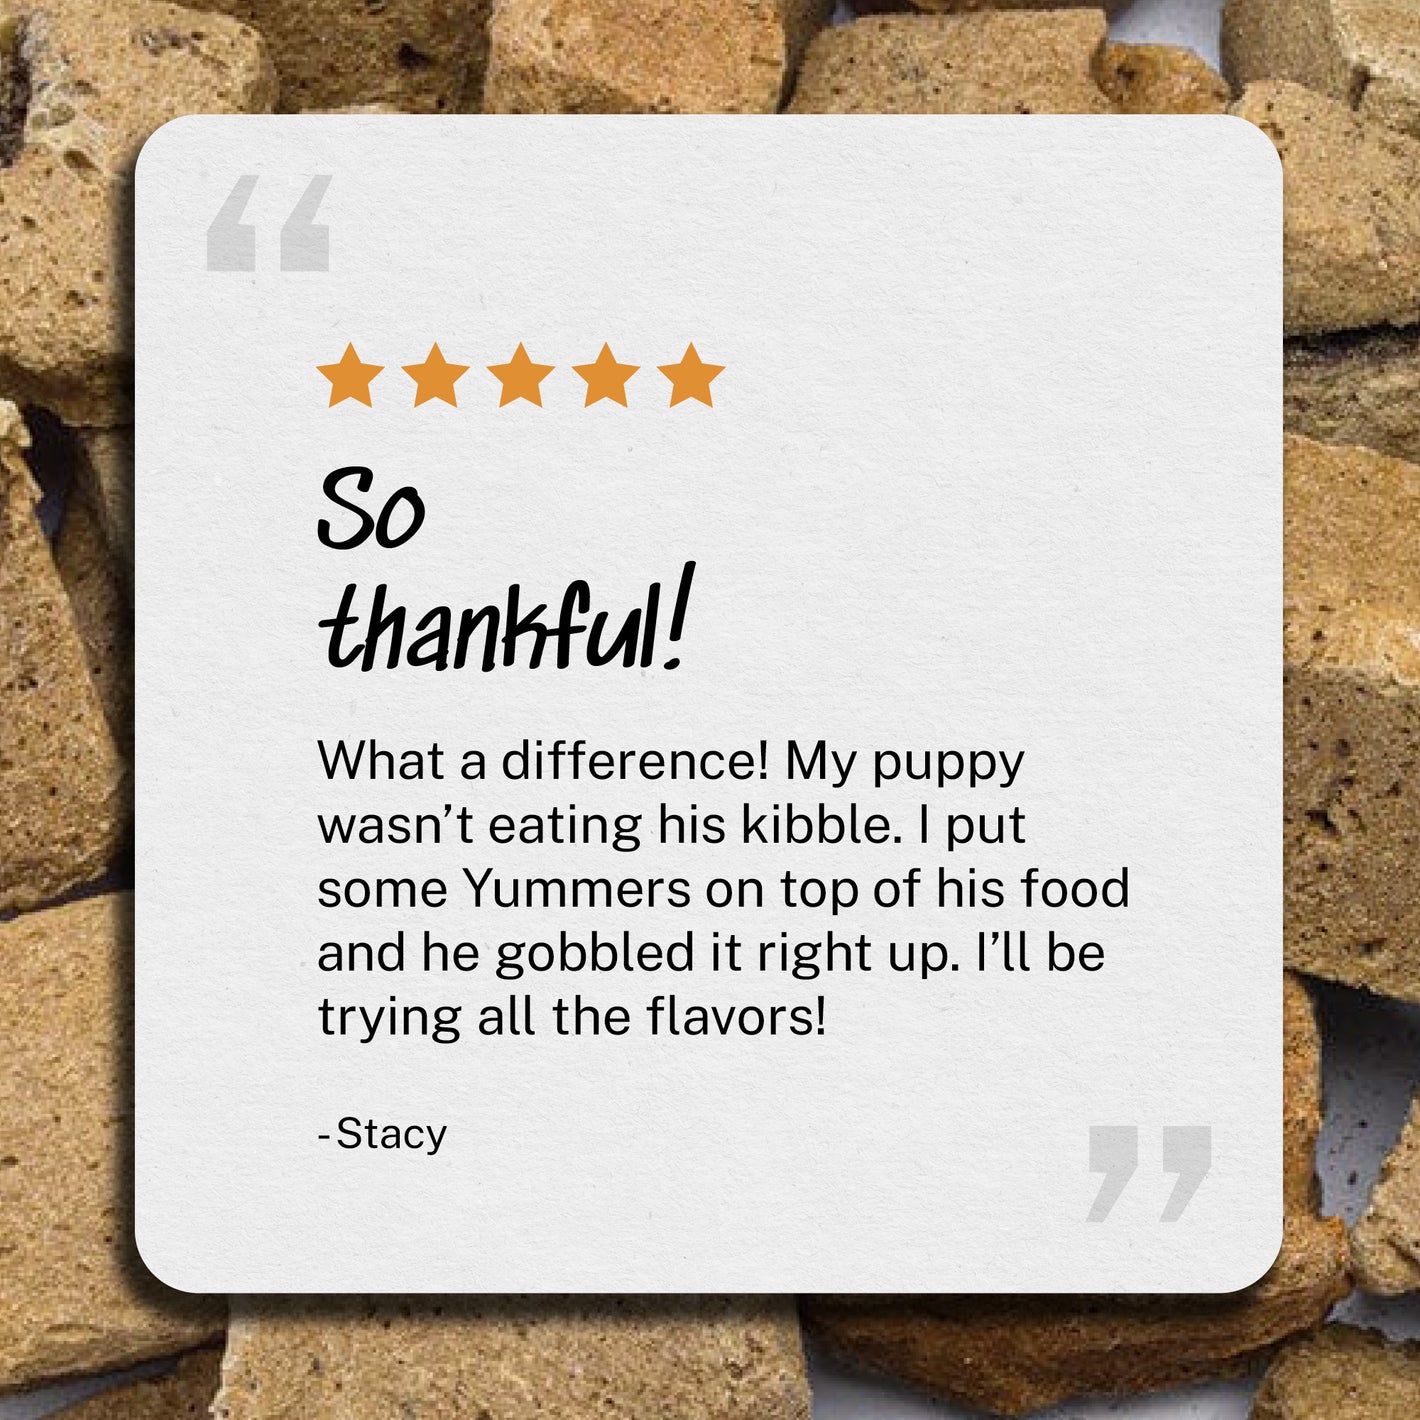 So thankful! What a difference! My puppy wasn’t eating his kibble. I put some Yummers on top of his food and he gobbled it right up. I’ll be trying all the flavors! - Stacy